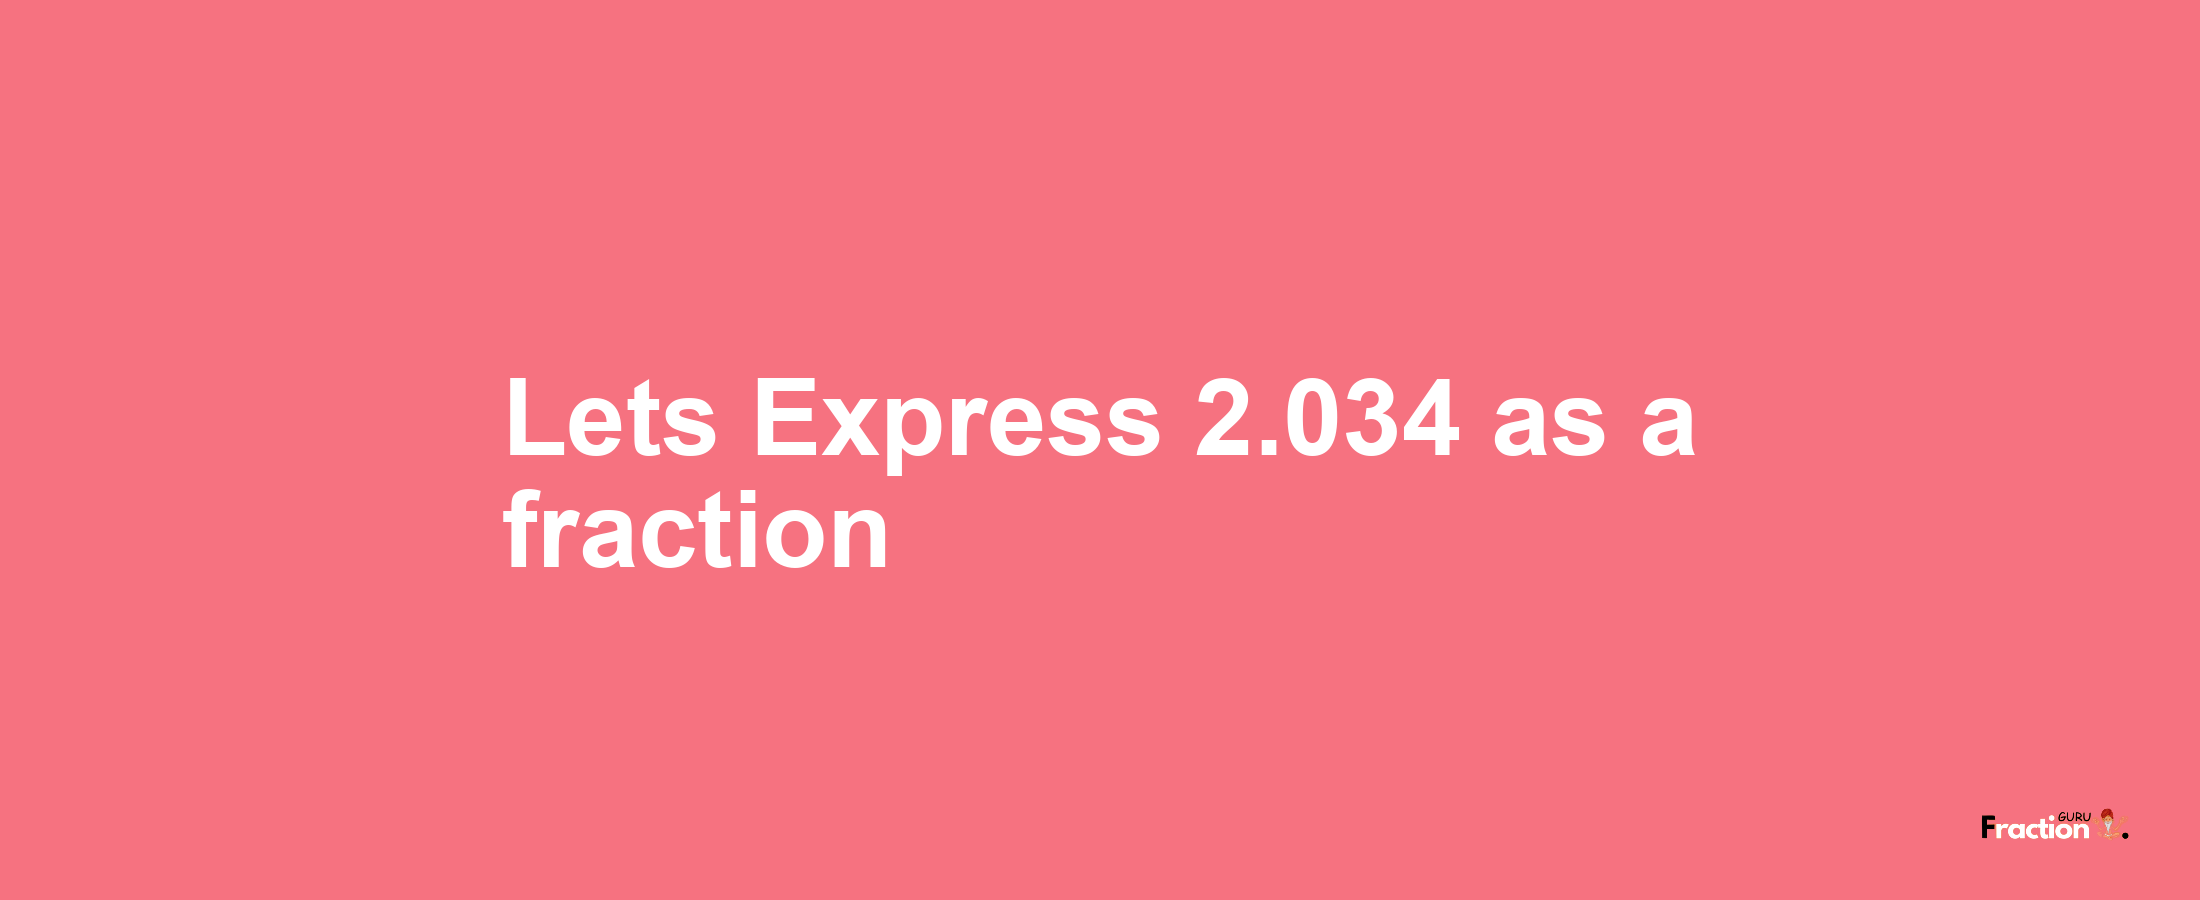 Lets Express 2.034 as afraction